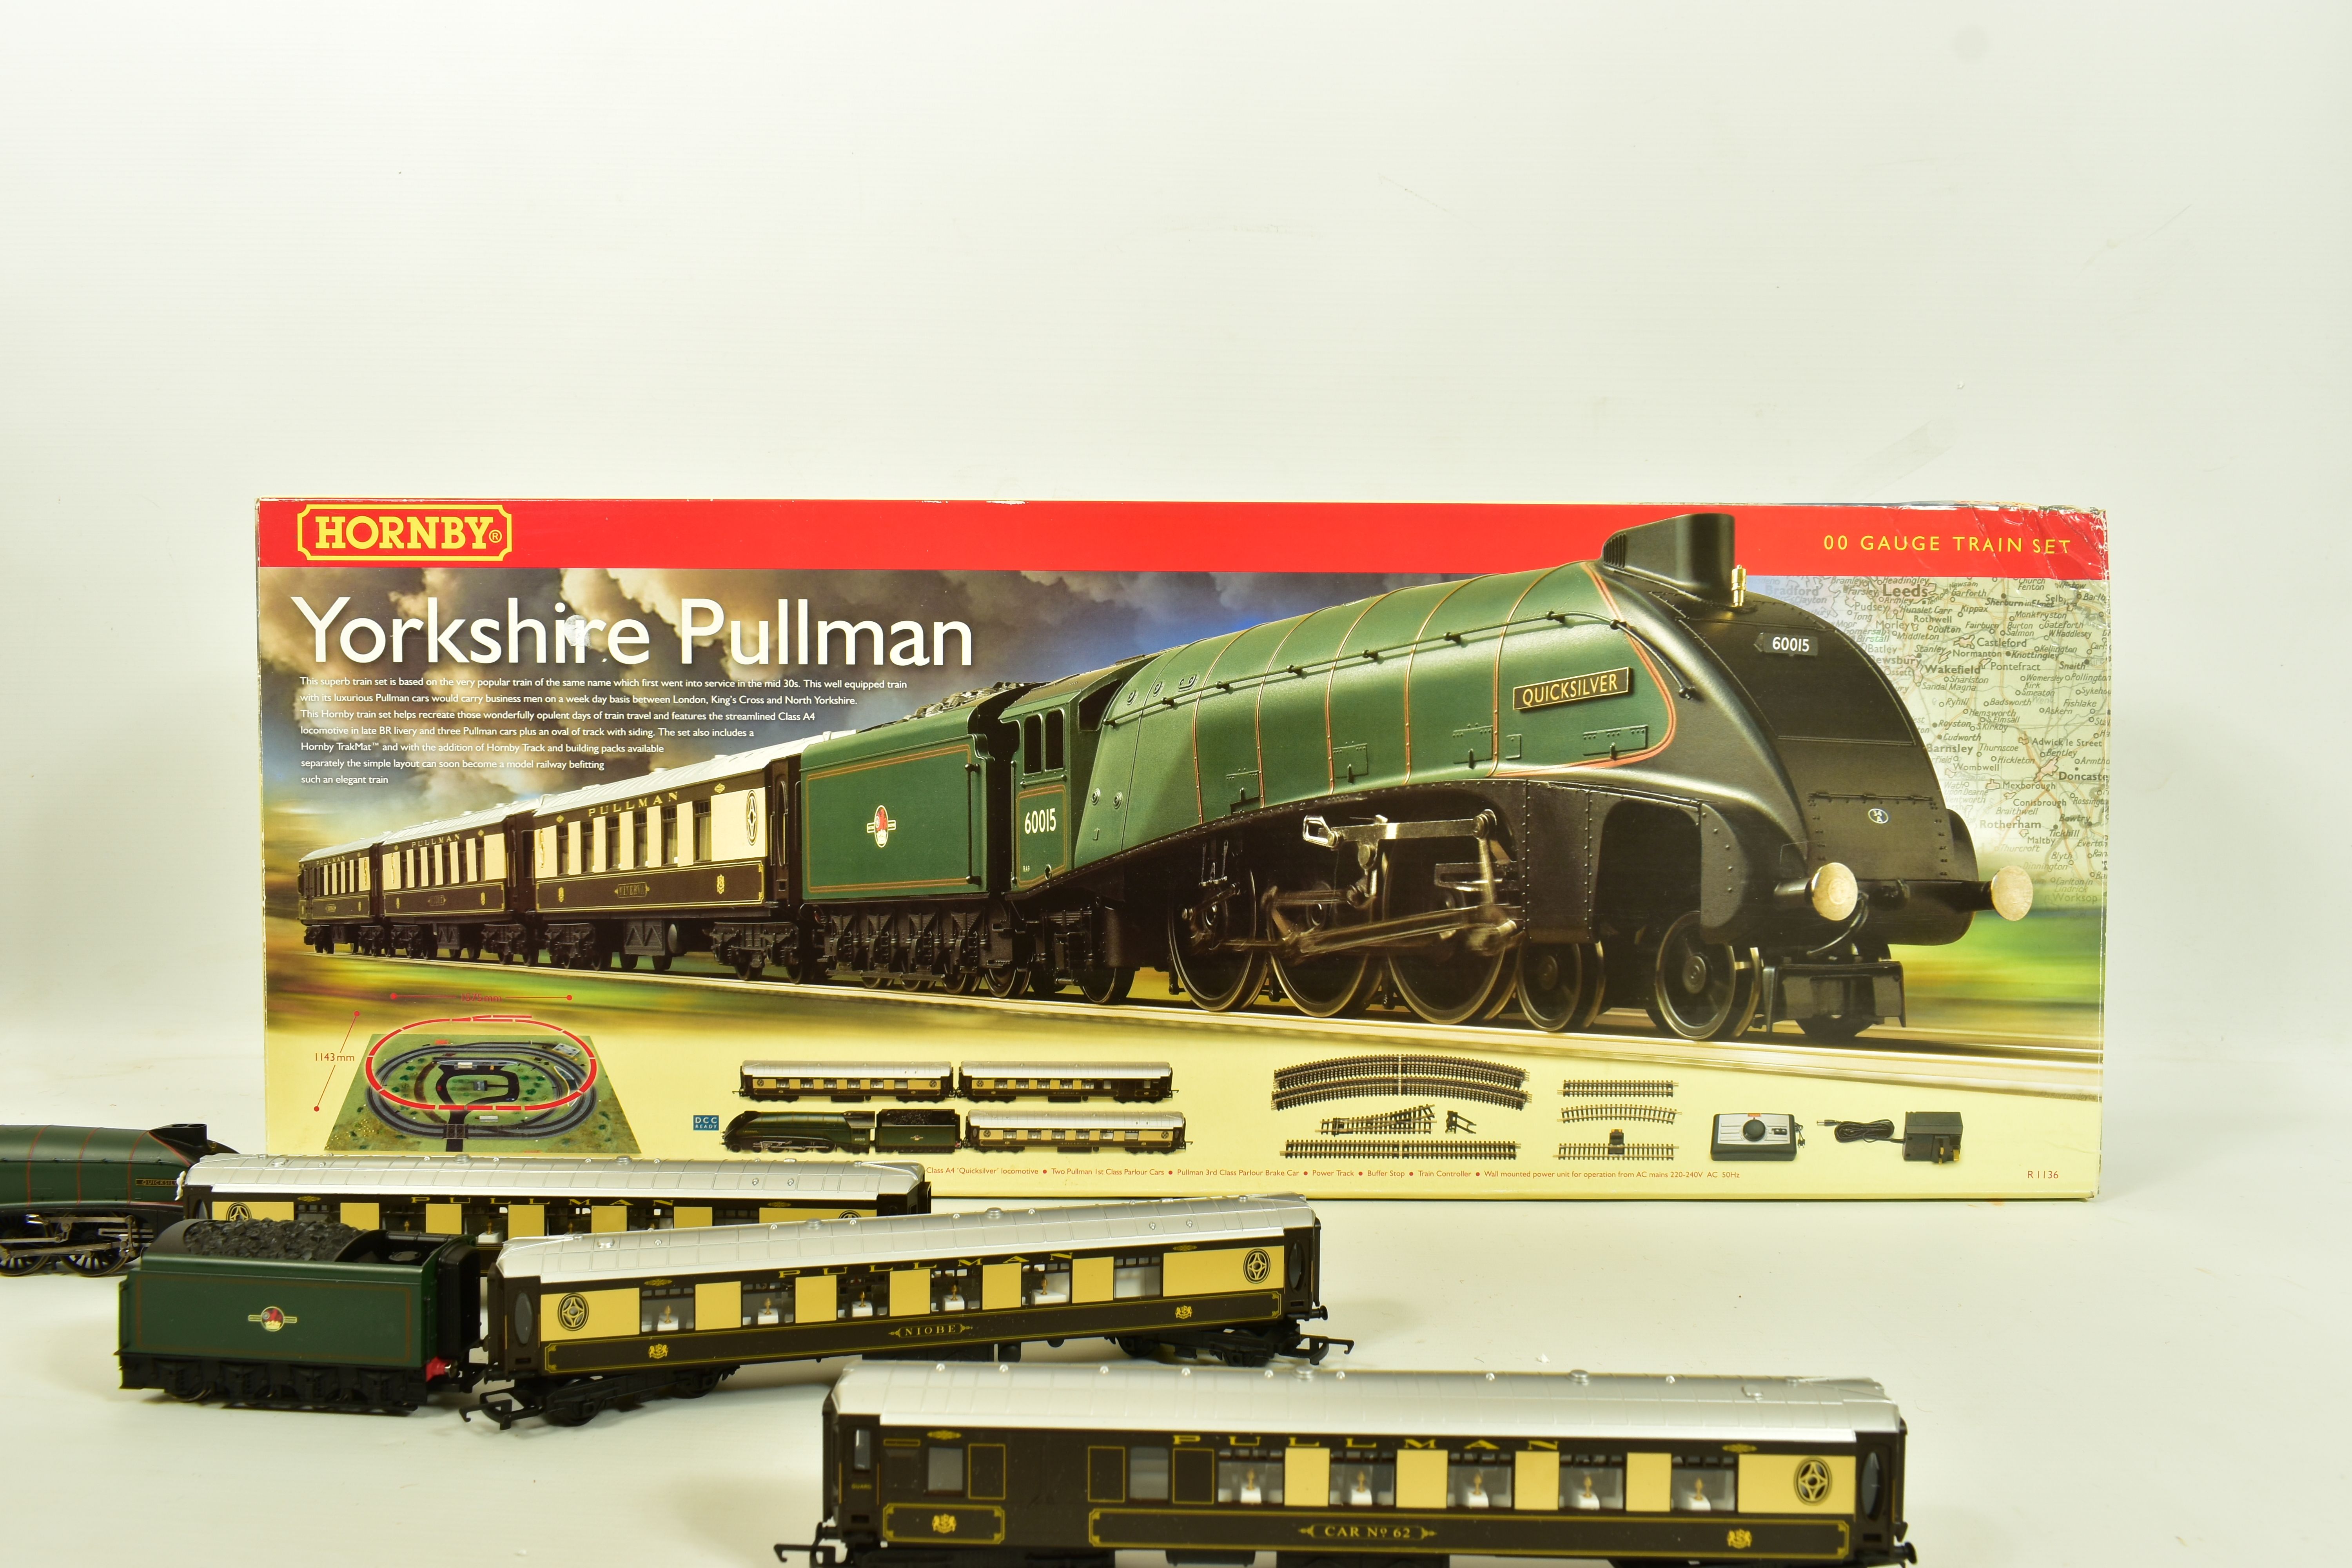 A BOXED HORNBY RAILWAYS OO GAUGE YORKSHIRE PULLMAN TRAIN SET - Image 4 of 15